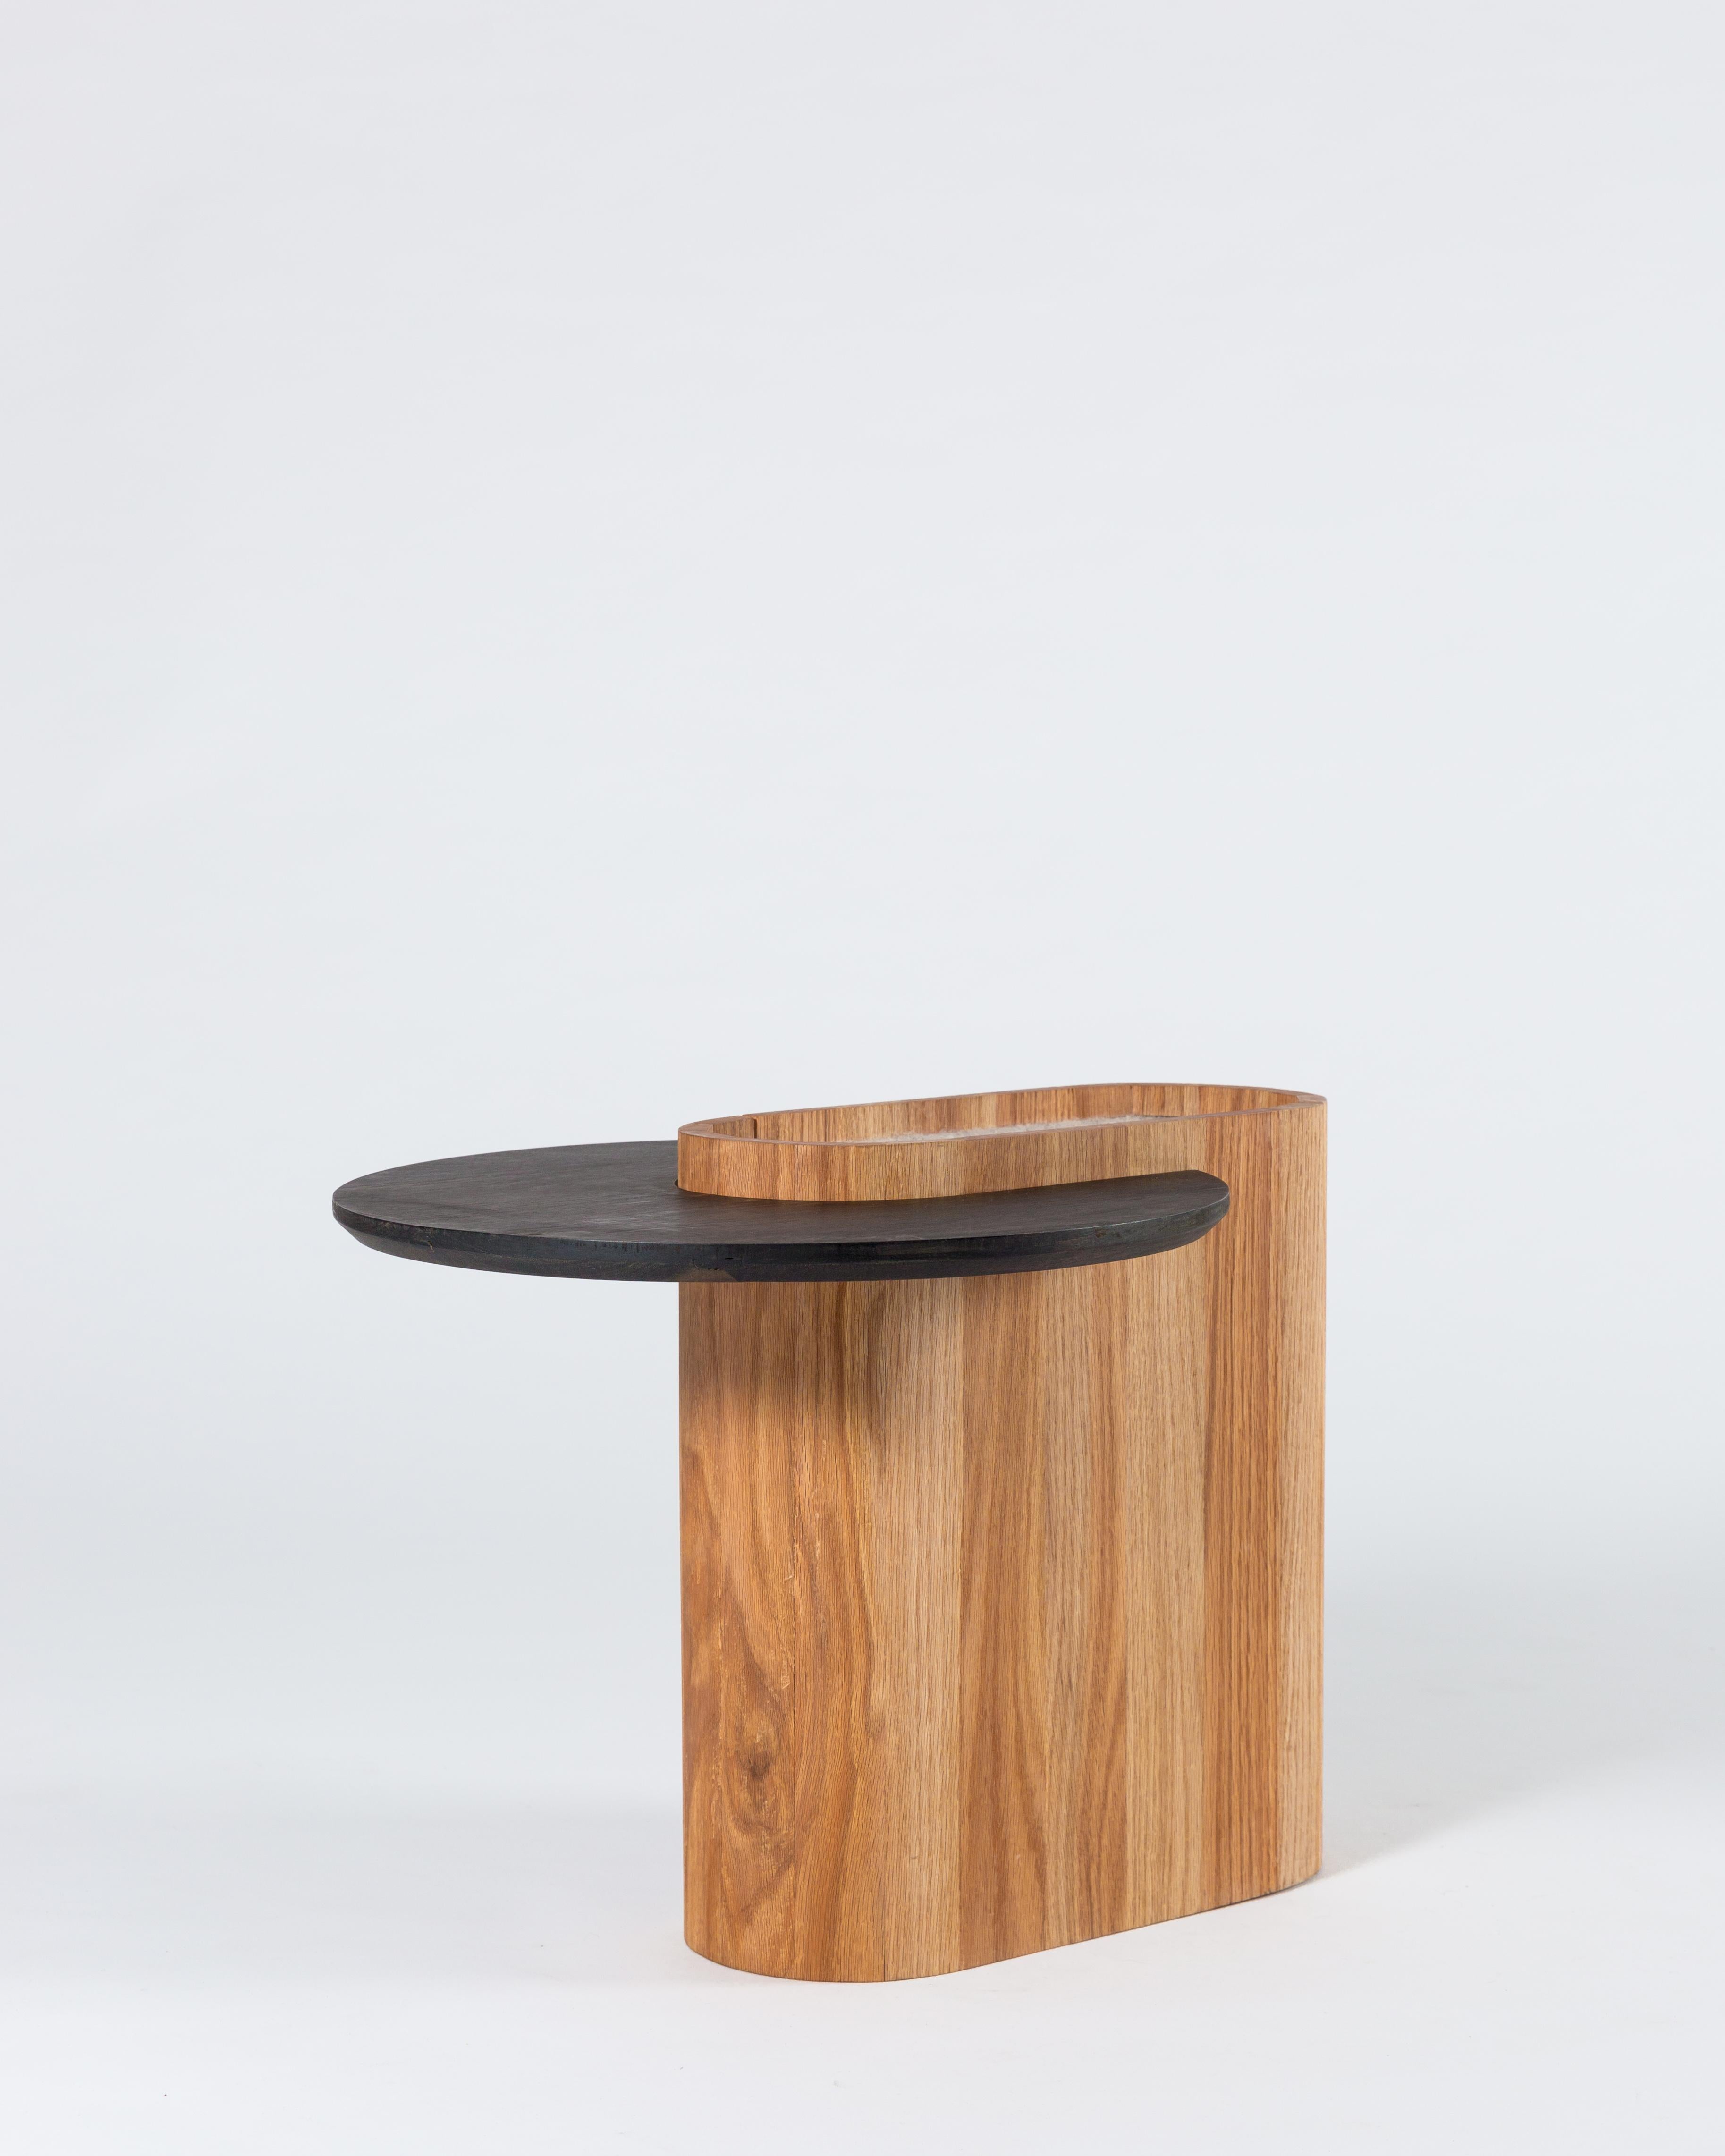 Perspectiva coffee table I by Colección Estudio
Dimensions: D 45 x W 54 x H 42 cm
Materials: oak wood, grey wool felt
Also available in ebonized oak wood and tzalam wood.

Collection 02, intends to improve our relationship with the spaces we